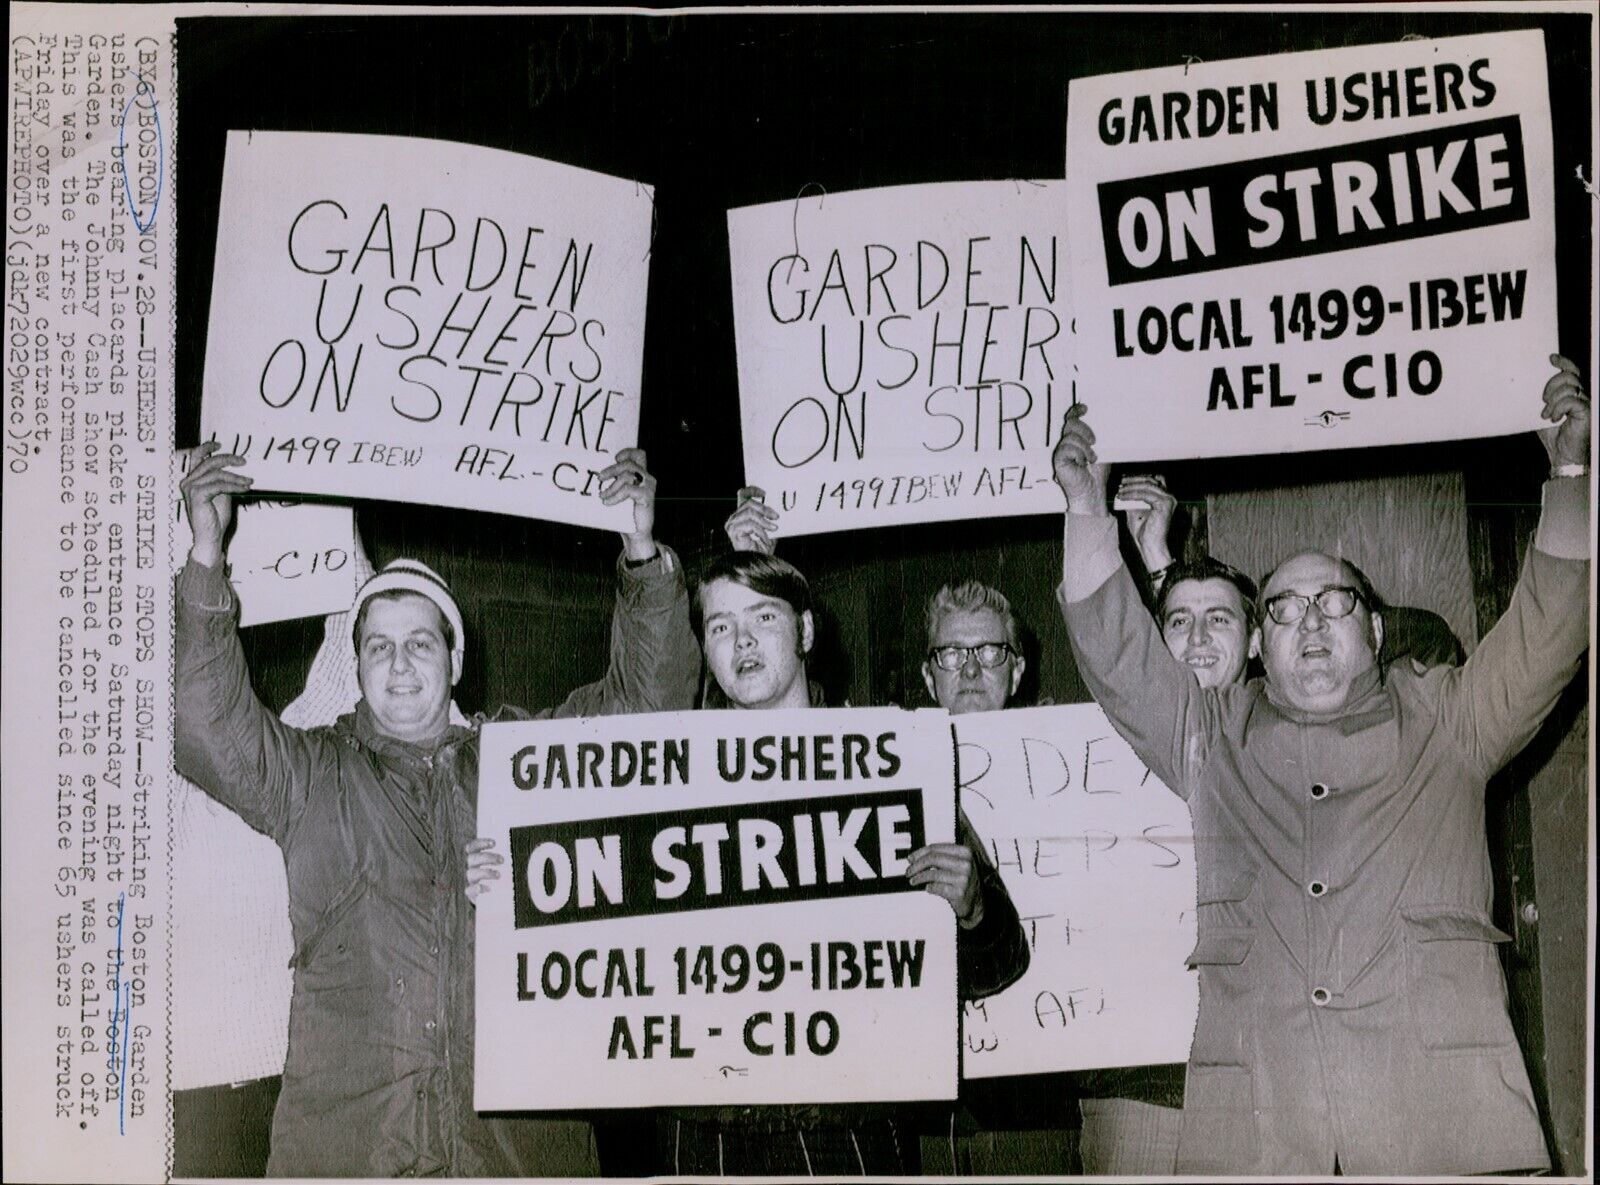 LG848 1970 Wire Photo USHERS STRIKE STOPS NOW Boston Garden Workers Placards